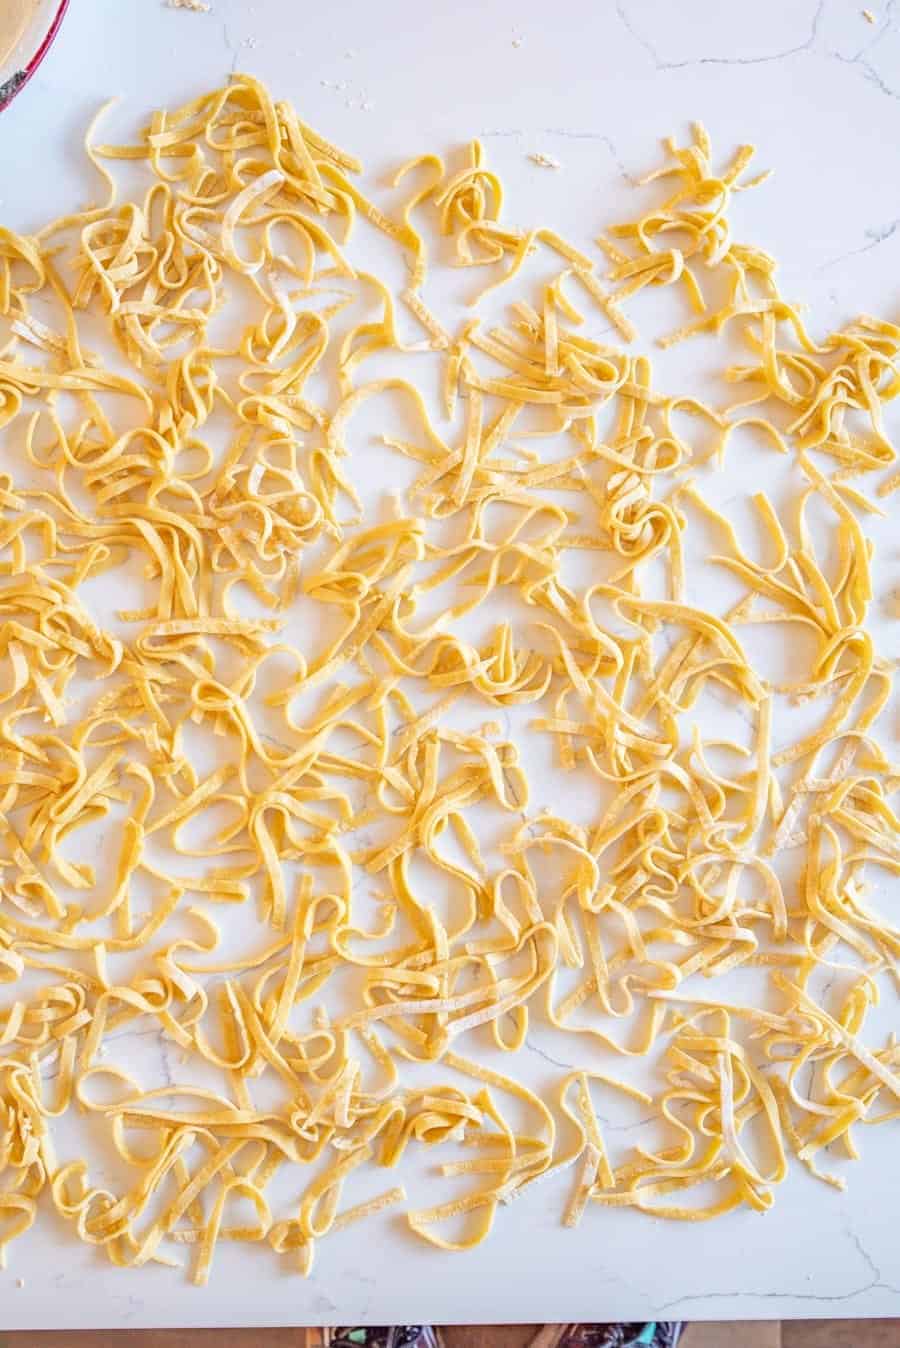 A simple guide on how to make homemade noodles with just a few simple ingredients and just like my grandma makes them.